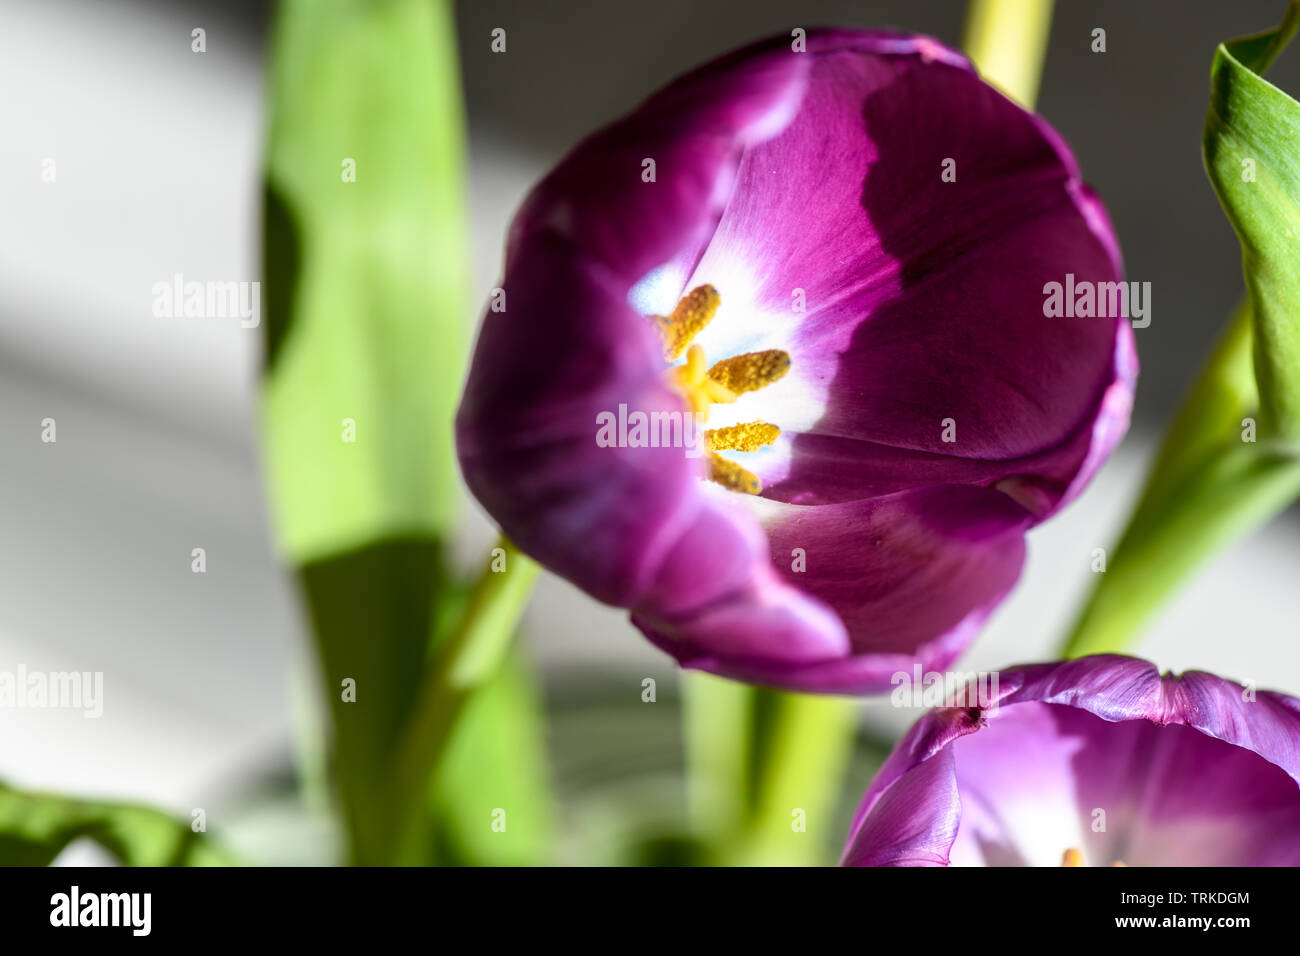 Bright purple Tulips with green stems shot in macro and indoors. Makes ideal cut flowers for display indoors. Tulip filaments in vibrant color. Stock Photo